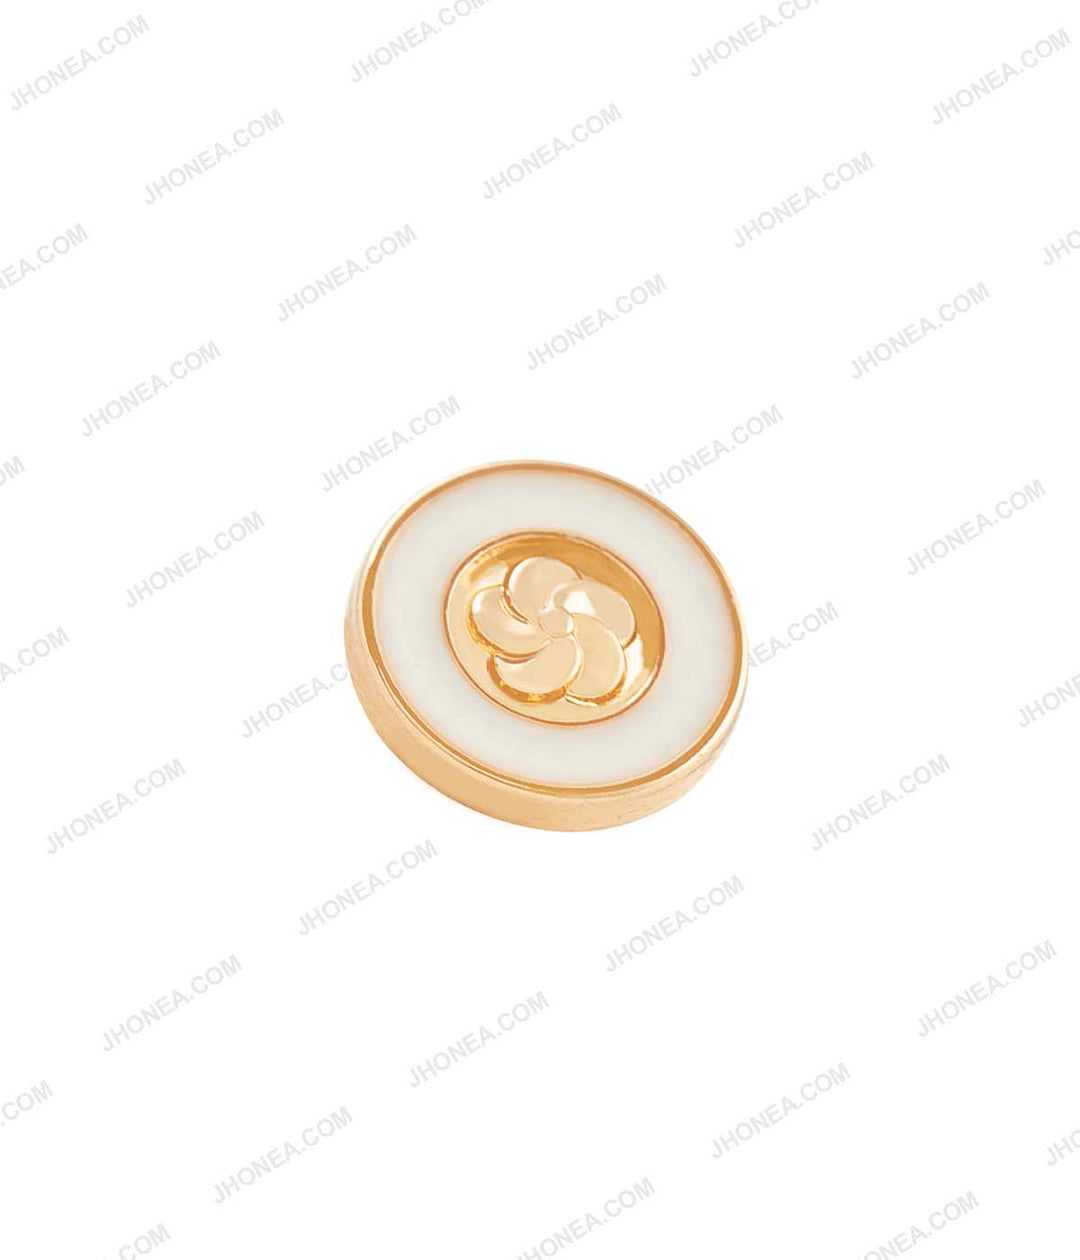 Shiny Embossed Flower Enamel Rim Border 10mm Shiny Gold with White Color Shirt Buttons